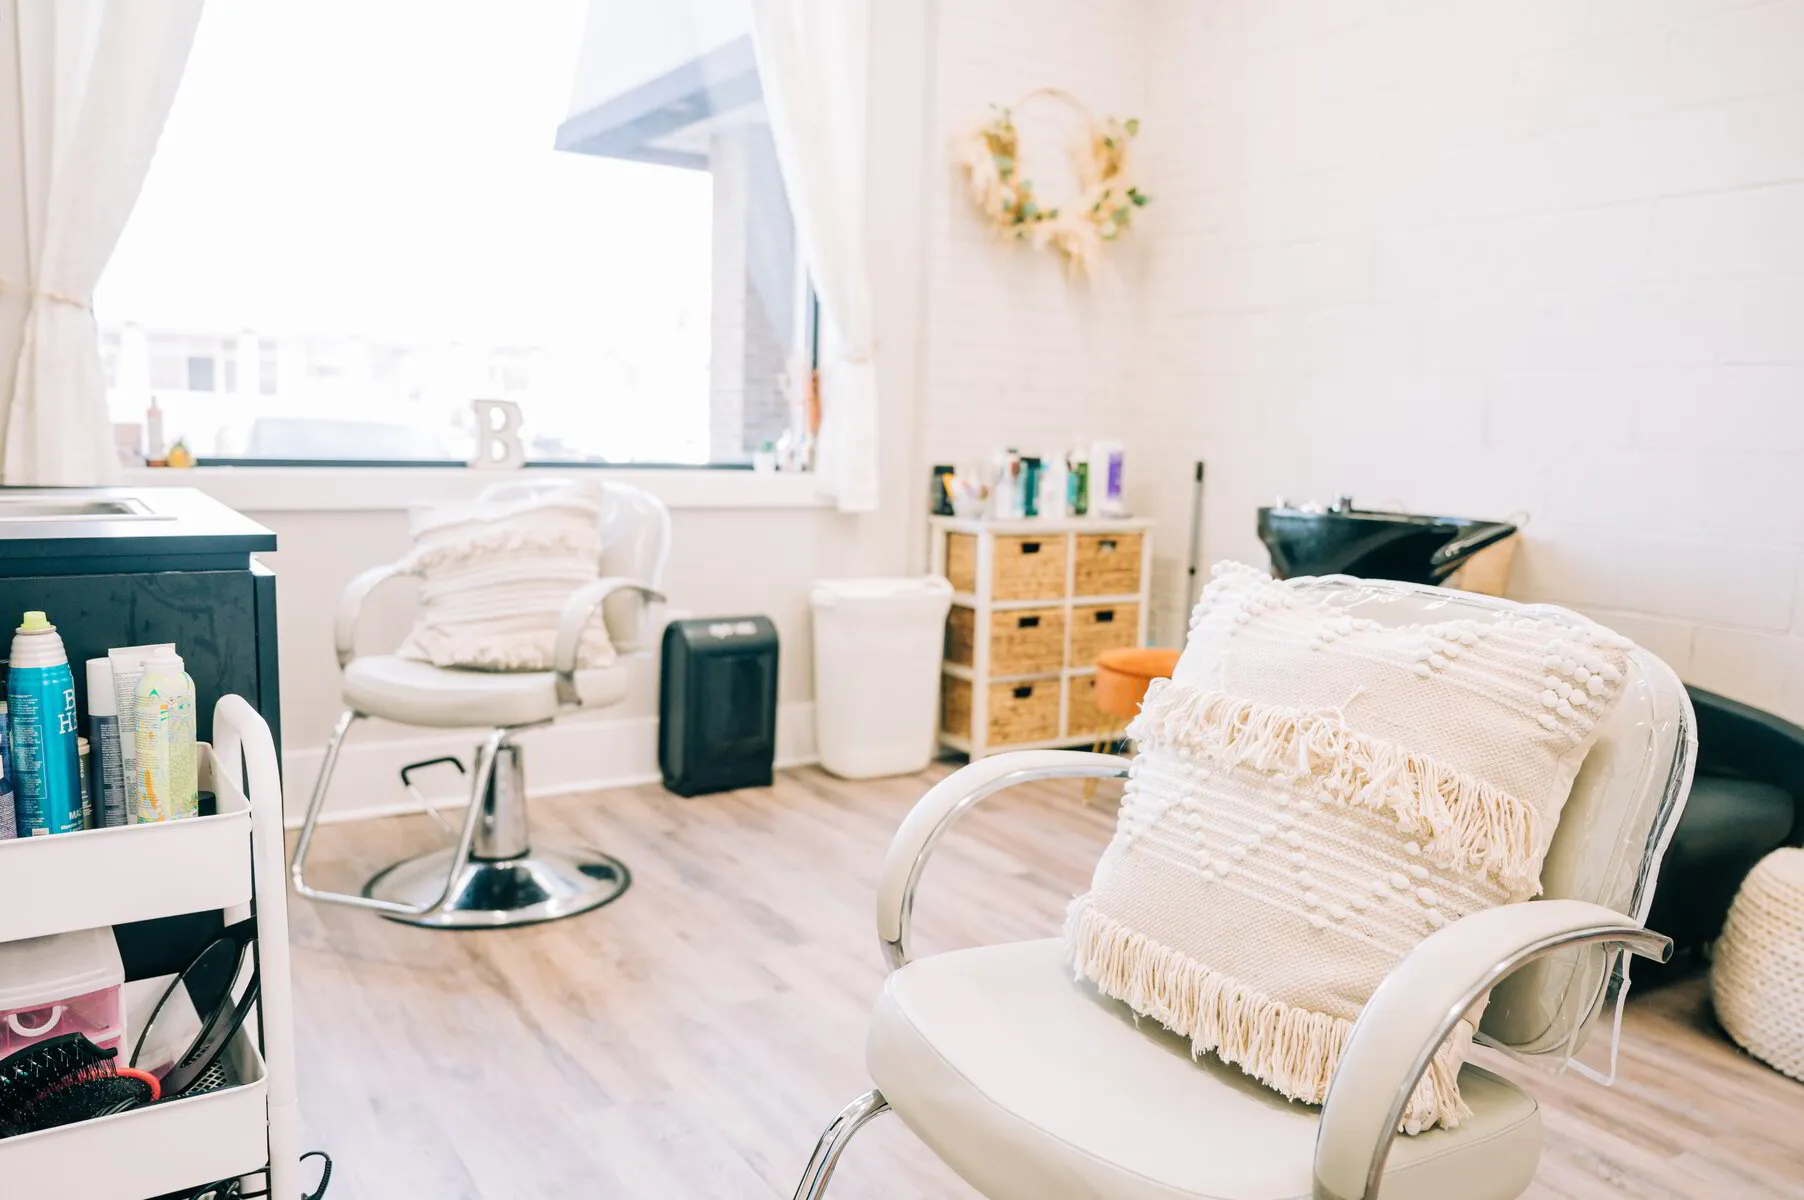 What are the pros and cons of working for a salon or owning your own salon business?